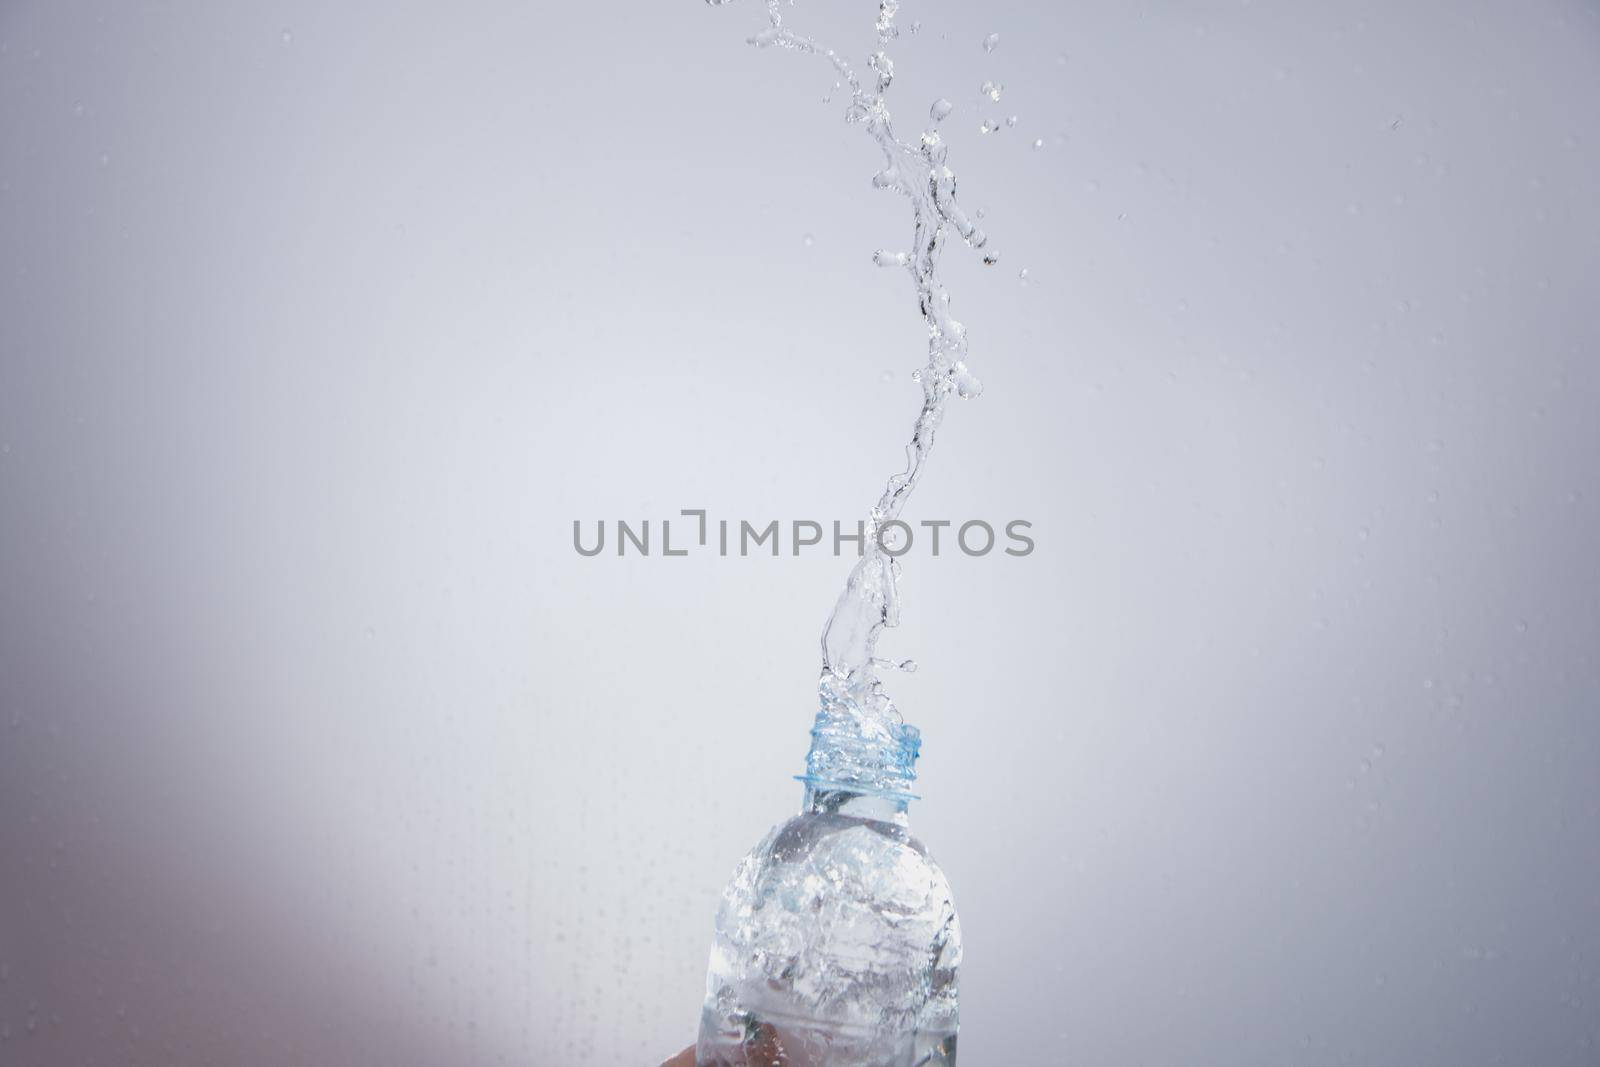 Pour water out of the bottle by yayimage